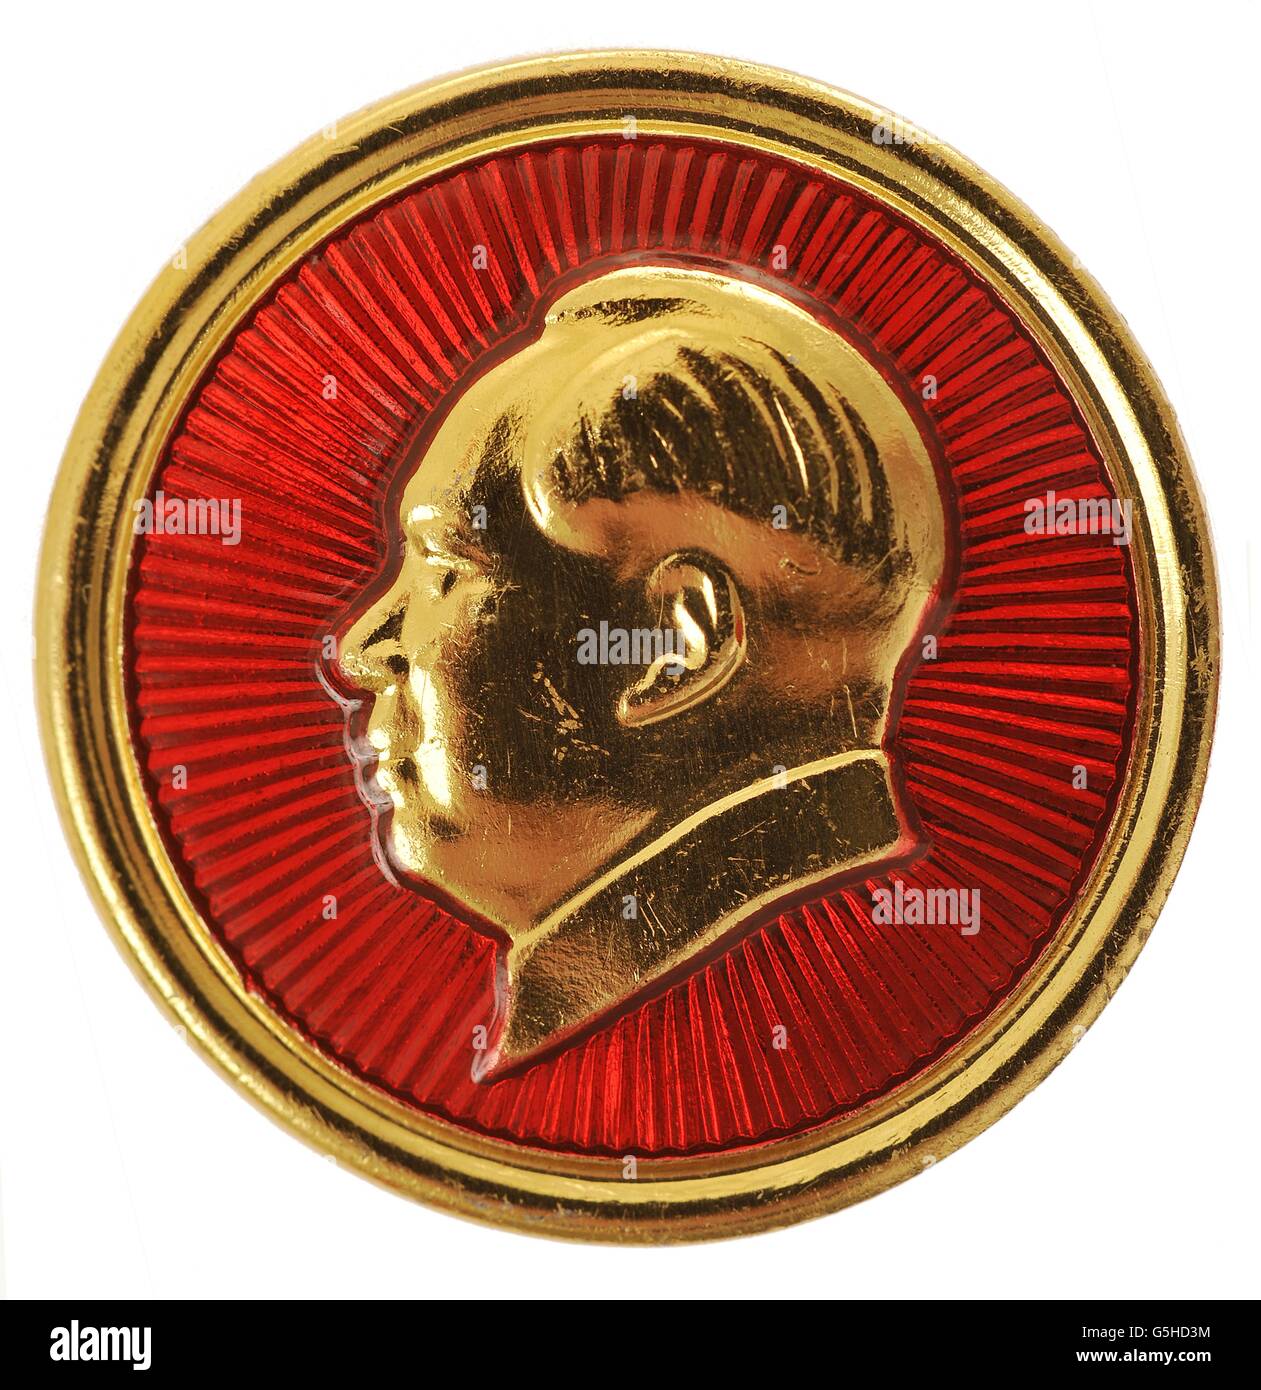 Mao Zedong, 26.12.1893 - 9.9.1976, Chinese politician, Chairman of the PeopleS s Republic of China 1949 - 1976, portrait, profile, badge, circa 1960s, Stock Photo